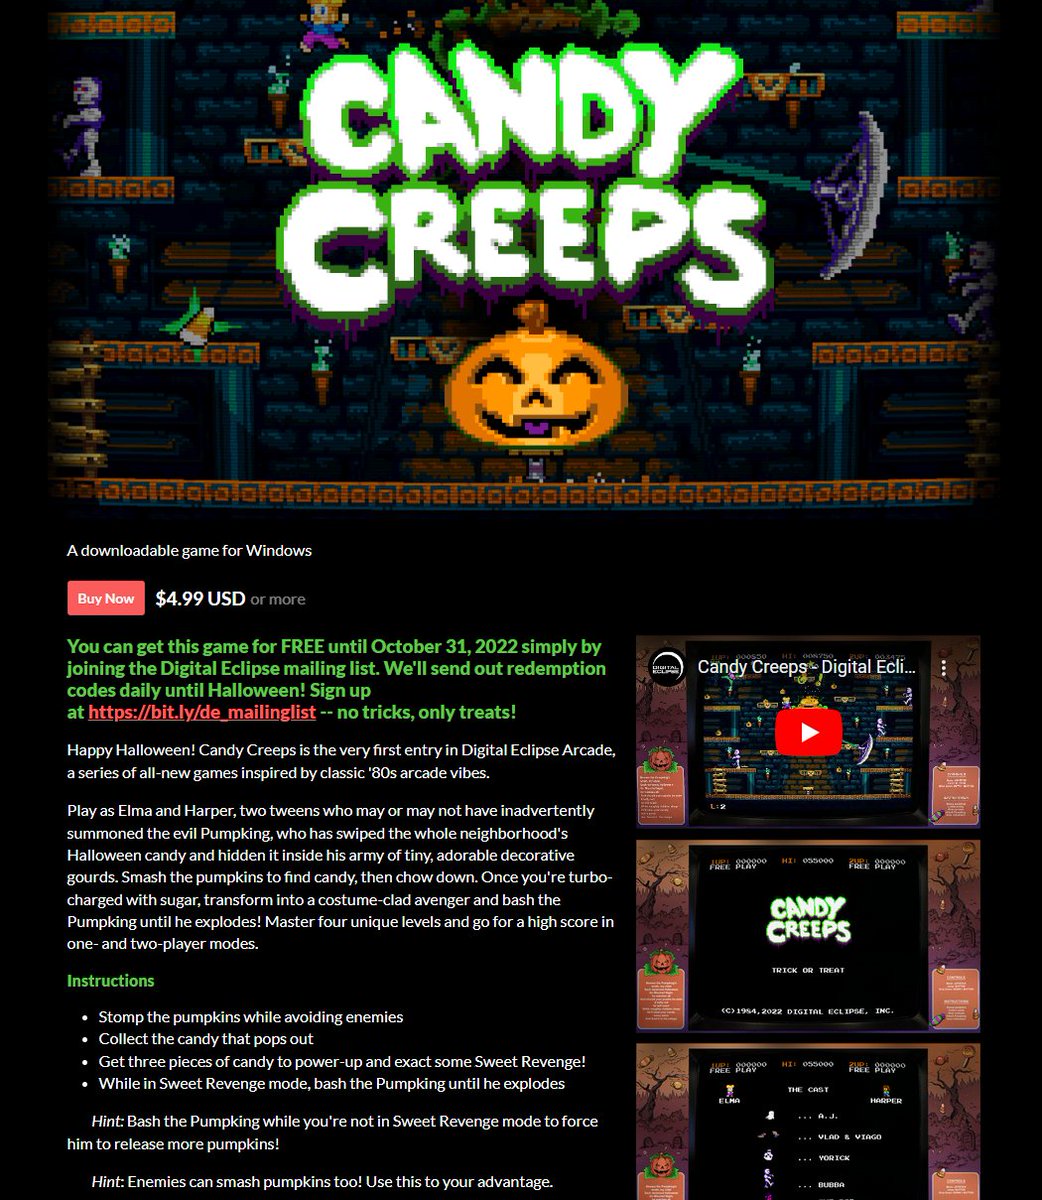 Candy Creeps is free on Itchio by signing up for Digital Eclipse mailing list bit.ly/3W10NBY